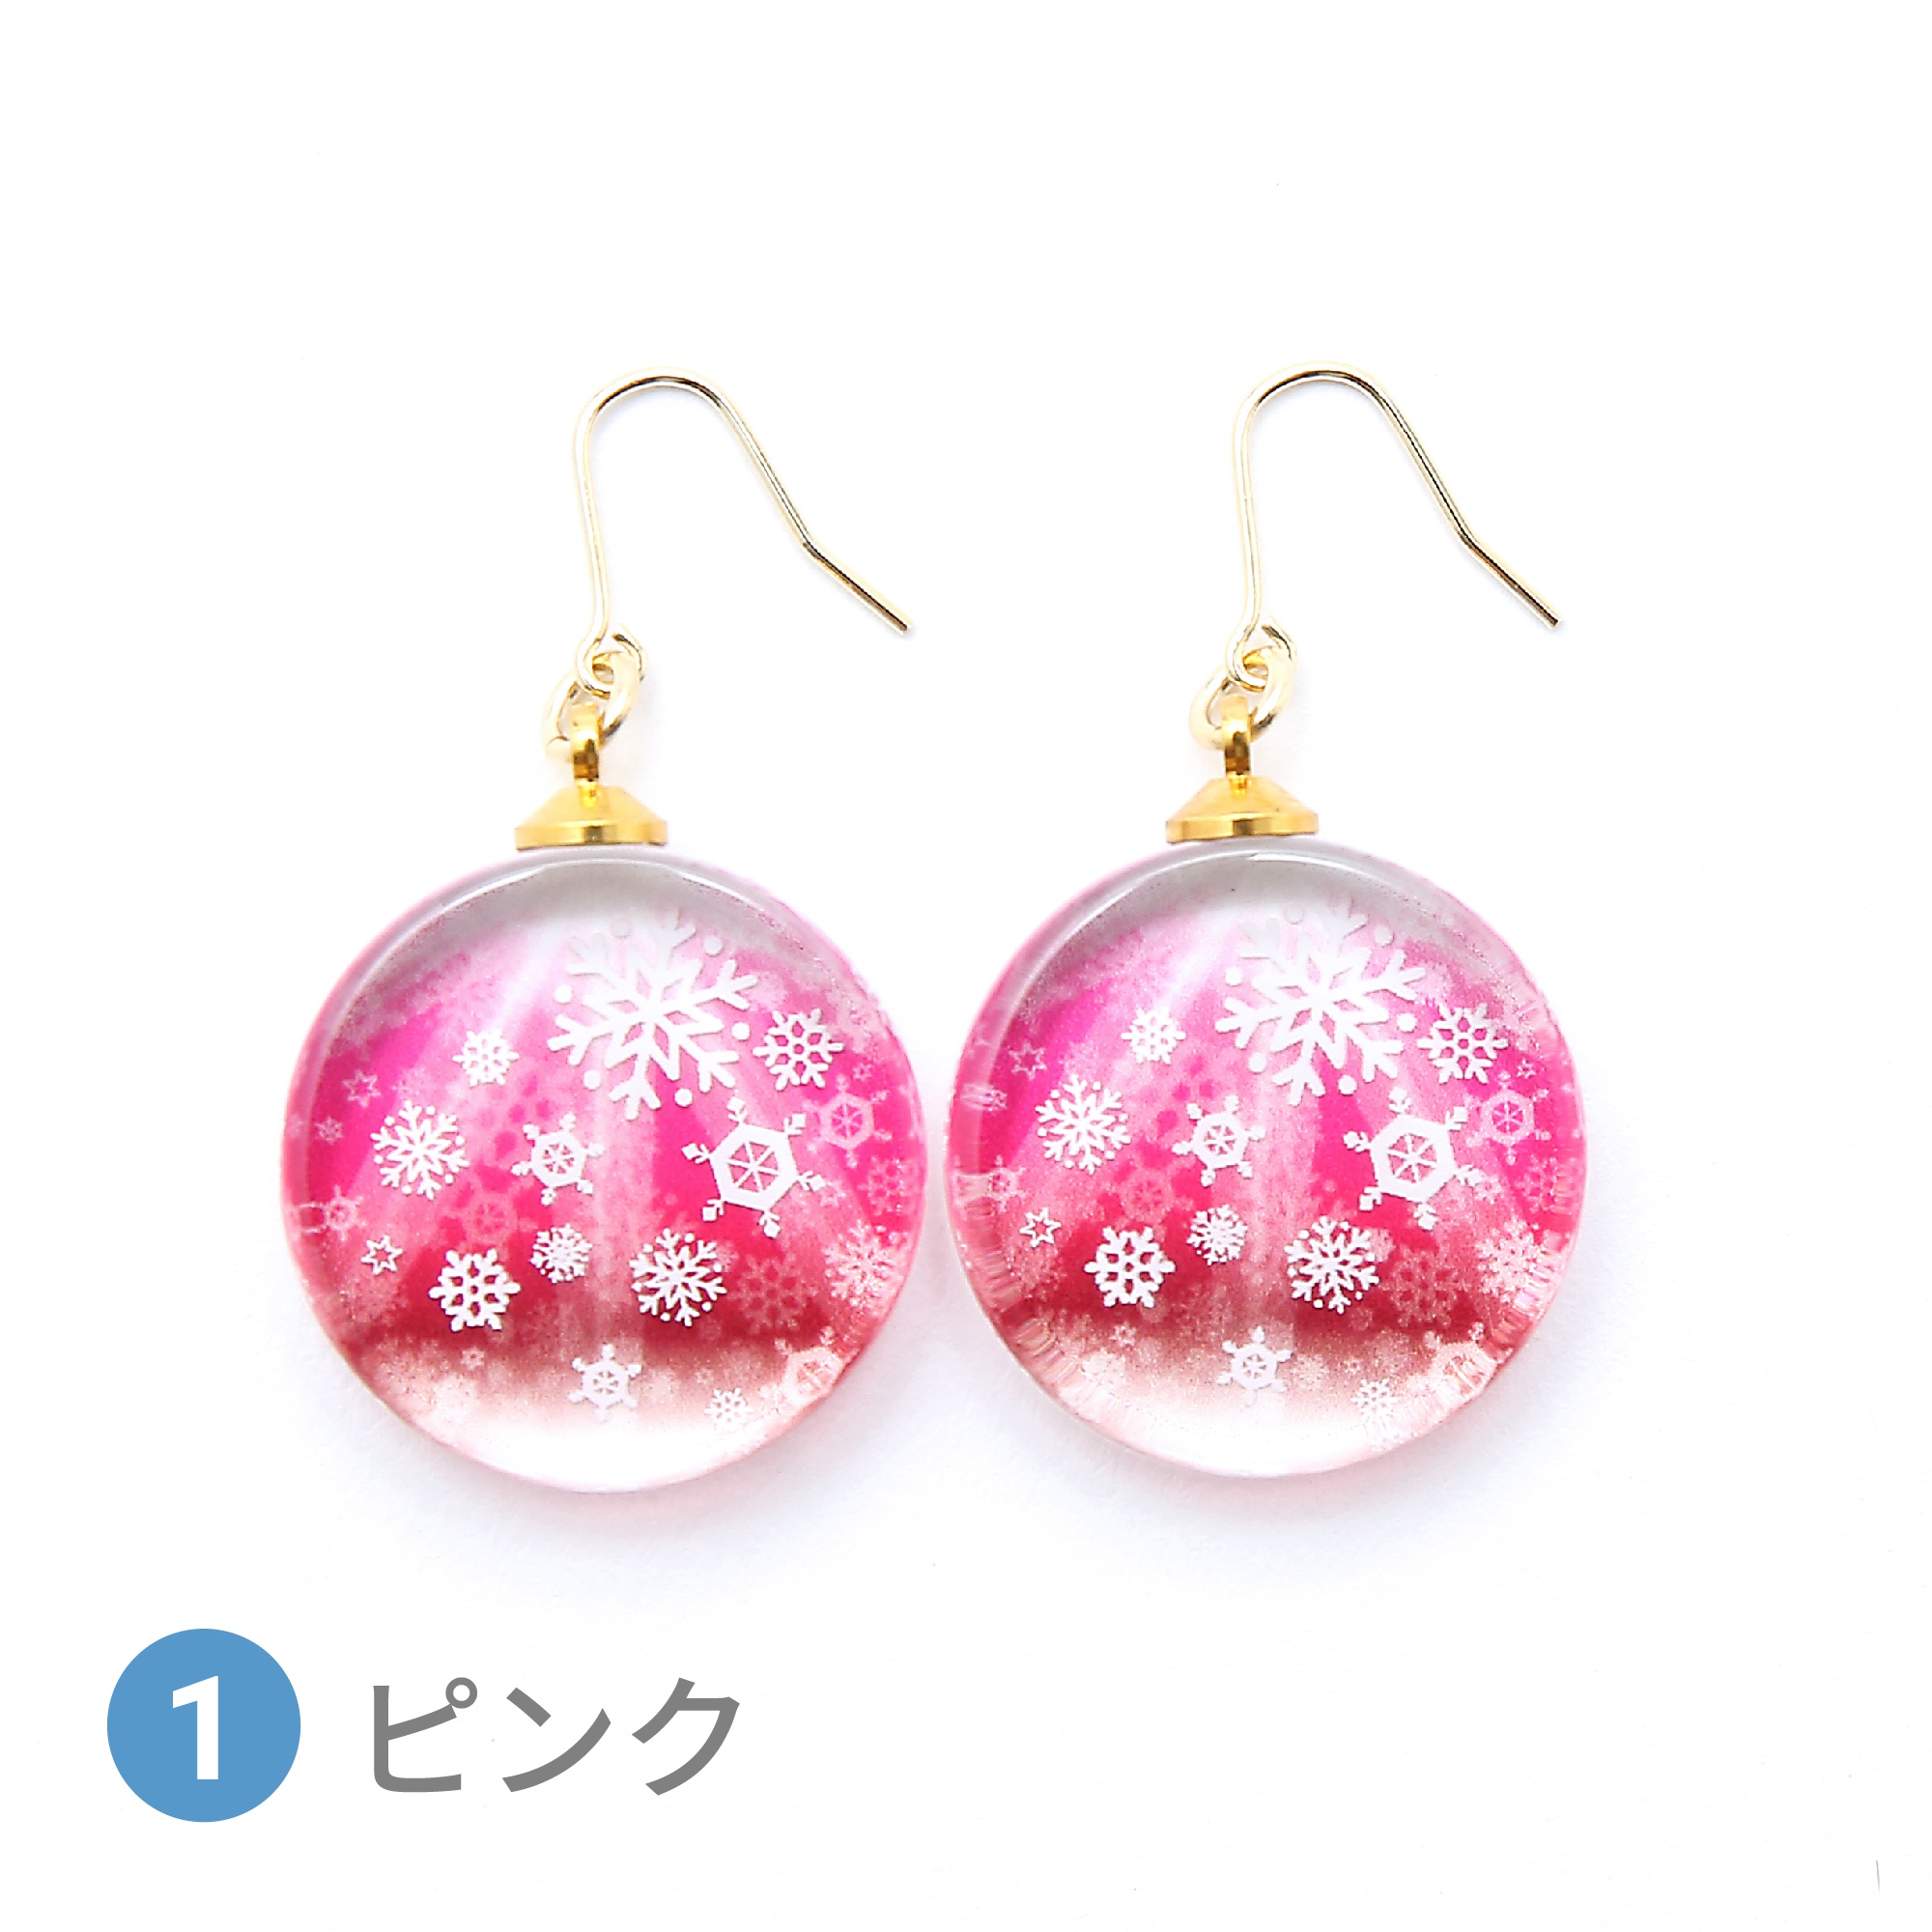 Glass accessories Pierced Earring Shiny winter pink round shape